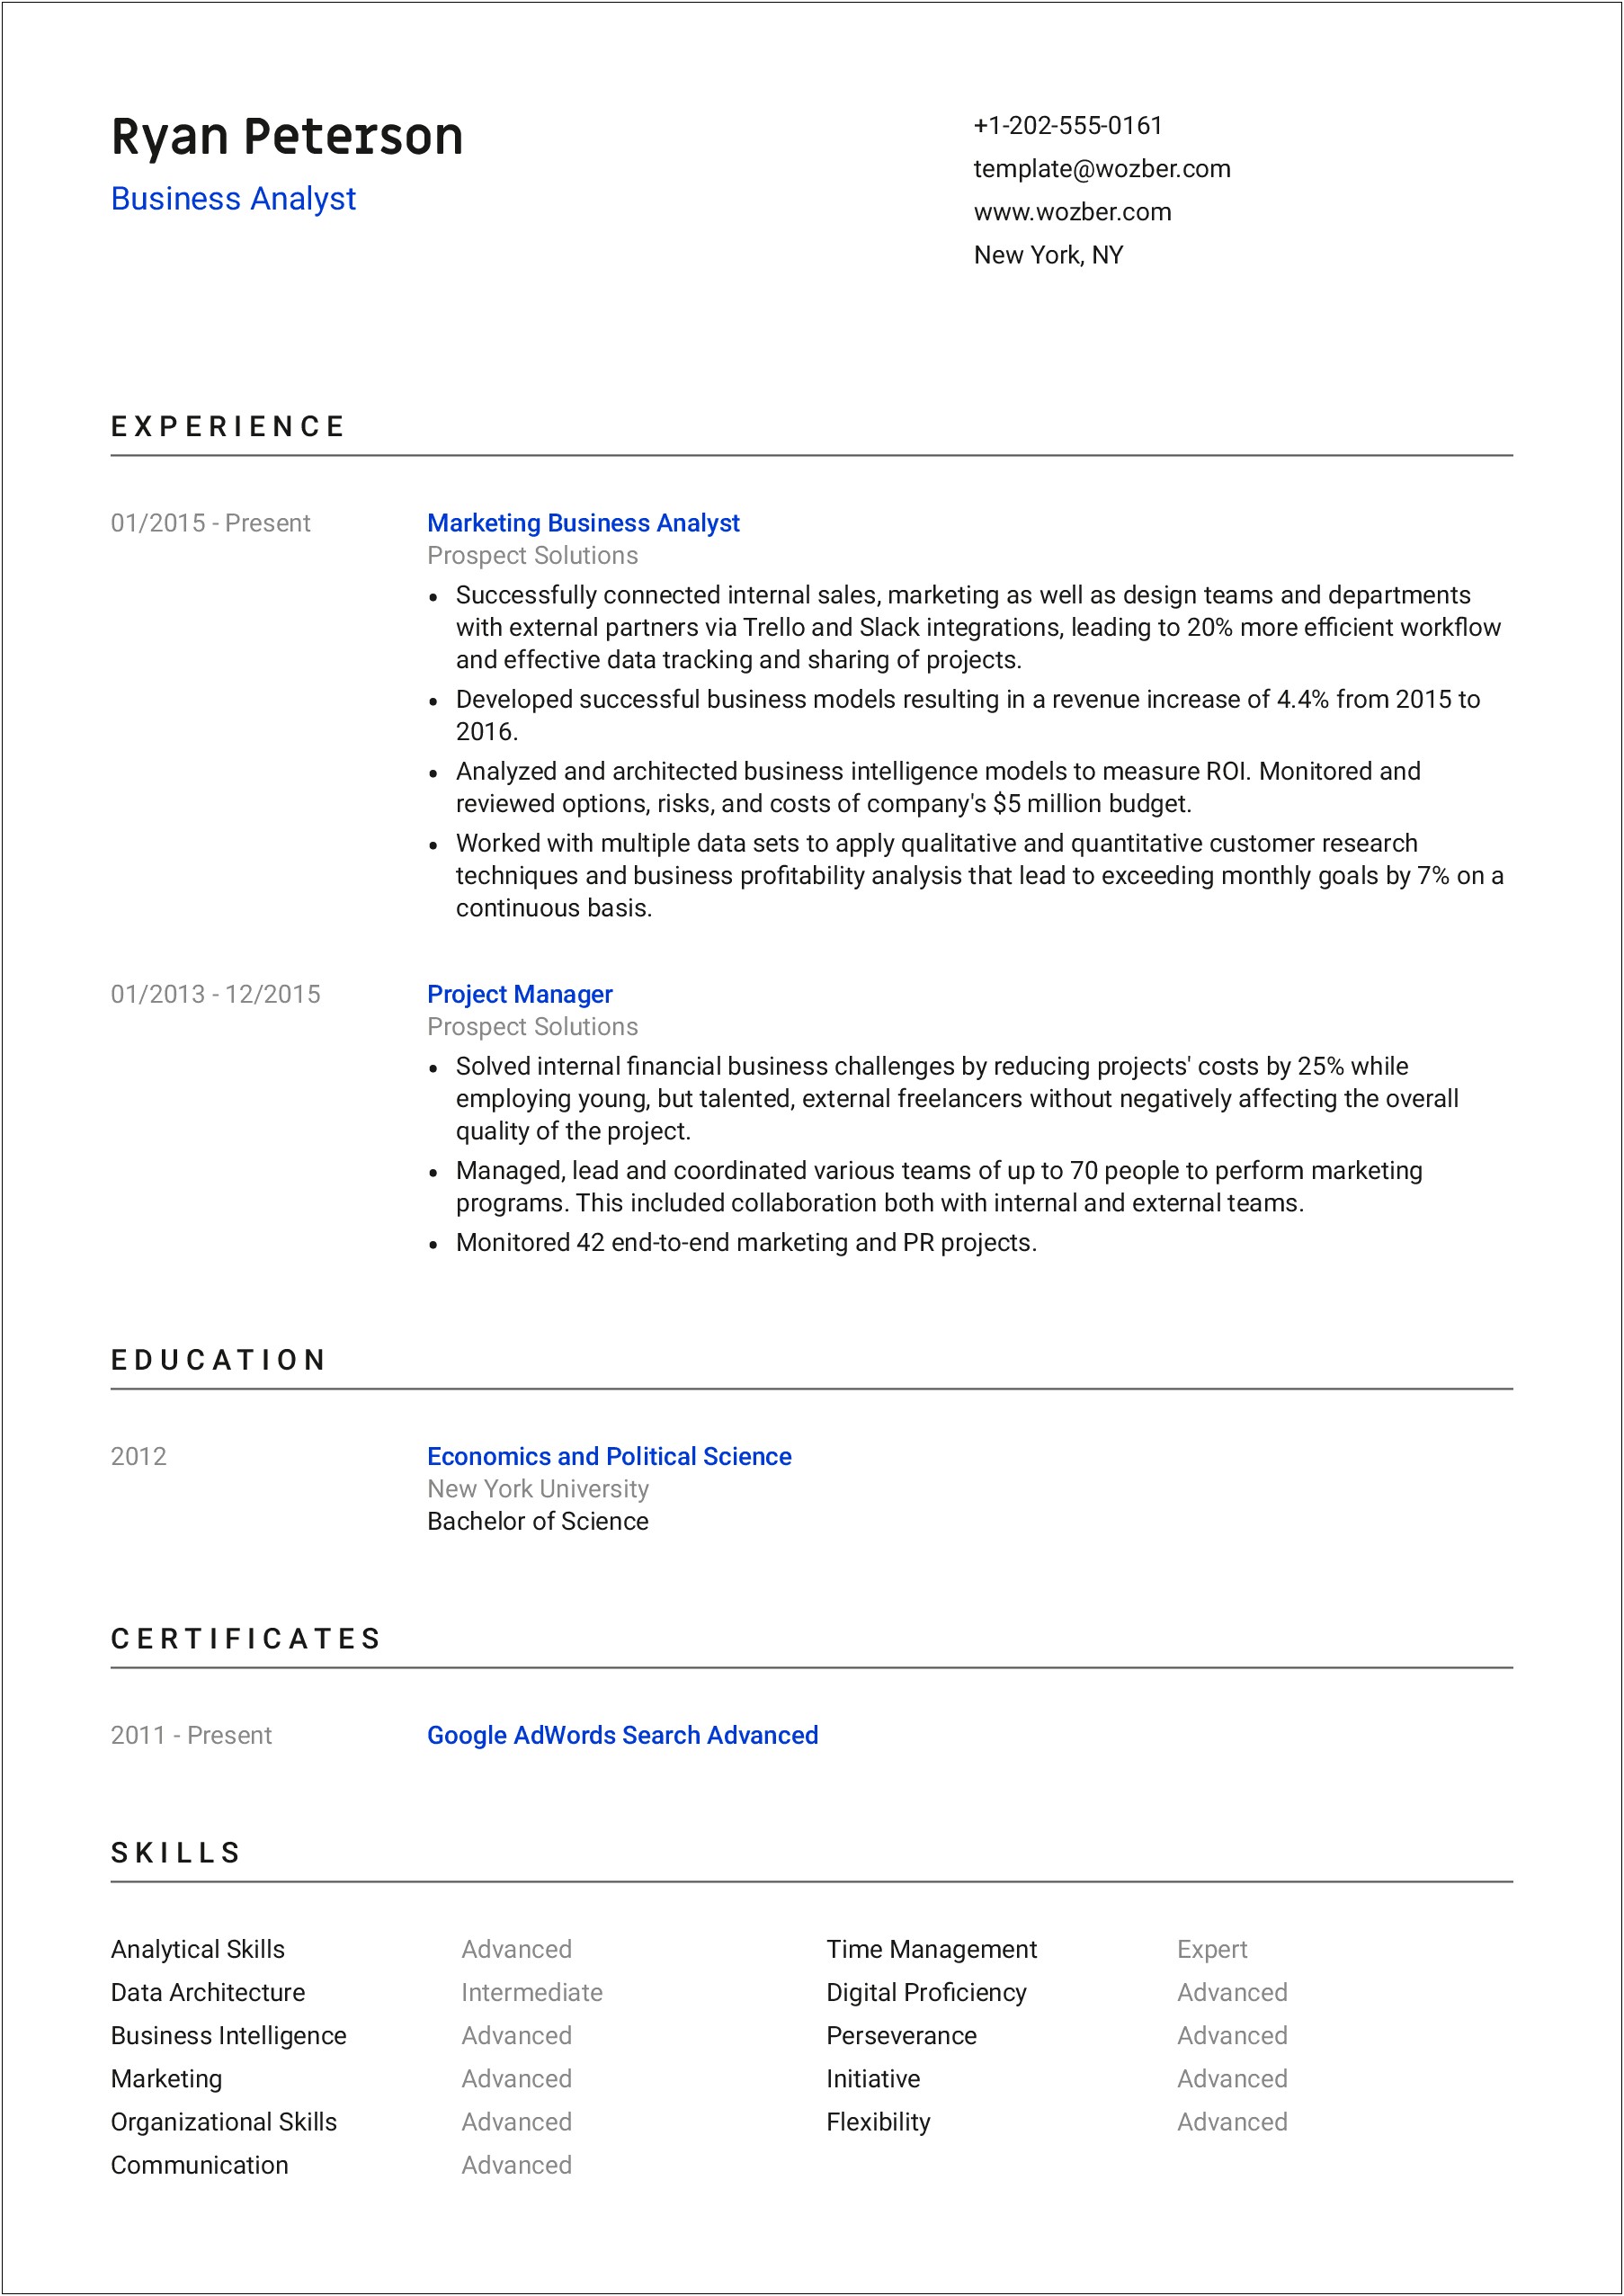 Best Resume Format For Applicant Tracking Systems